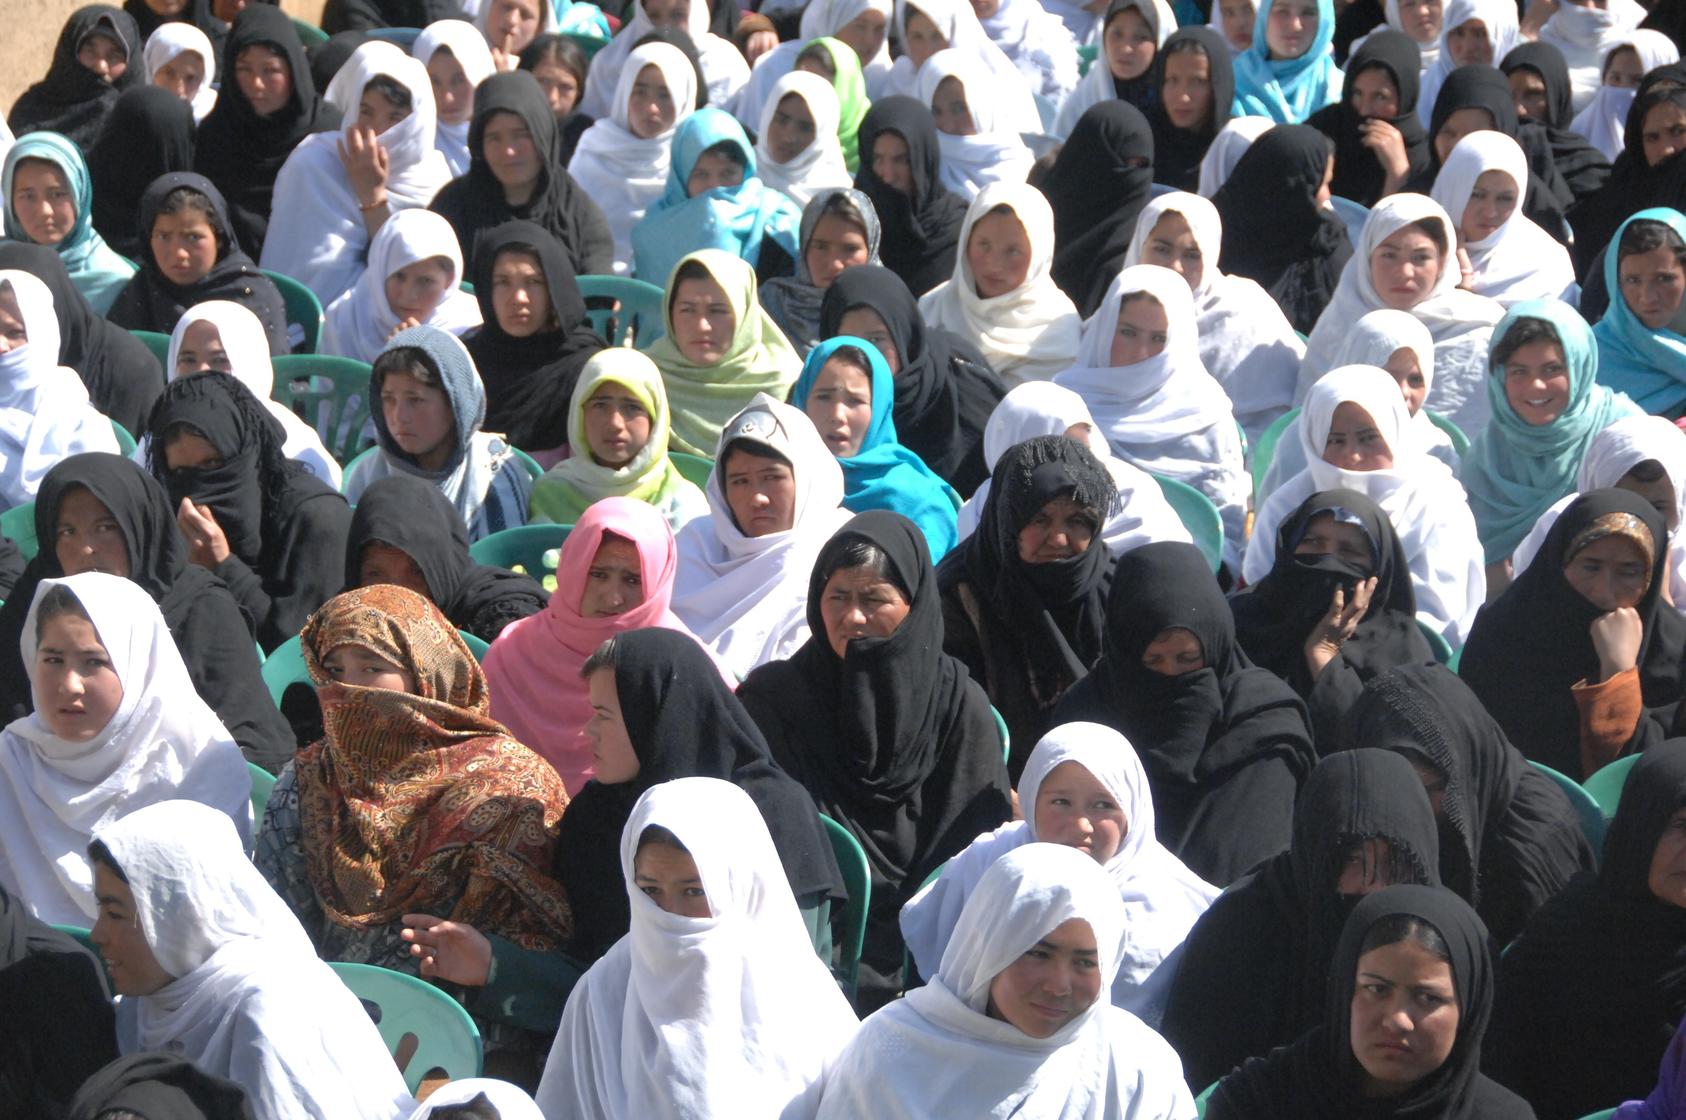 Afghan women in rural Daikundi province attend a rally in 2010. Rural women are vital for a dialogue with the Taliban that can achieve peace with respect for women’s rights, says activist and negotiator Ayesha Aziz. (TSgt C.A. Cheney-CJSTF Afghanistan)